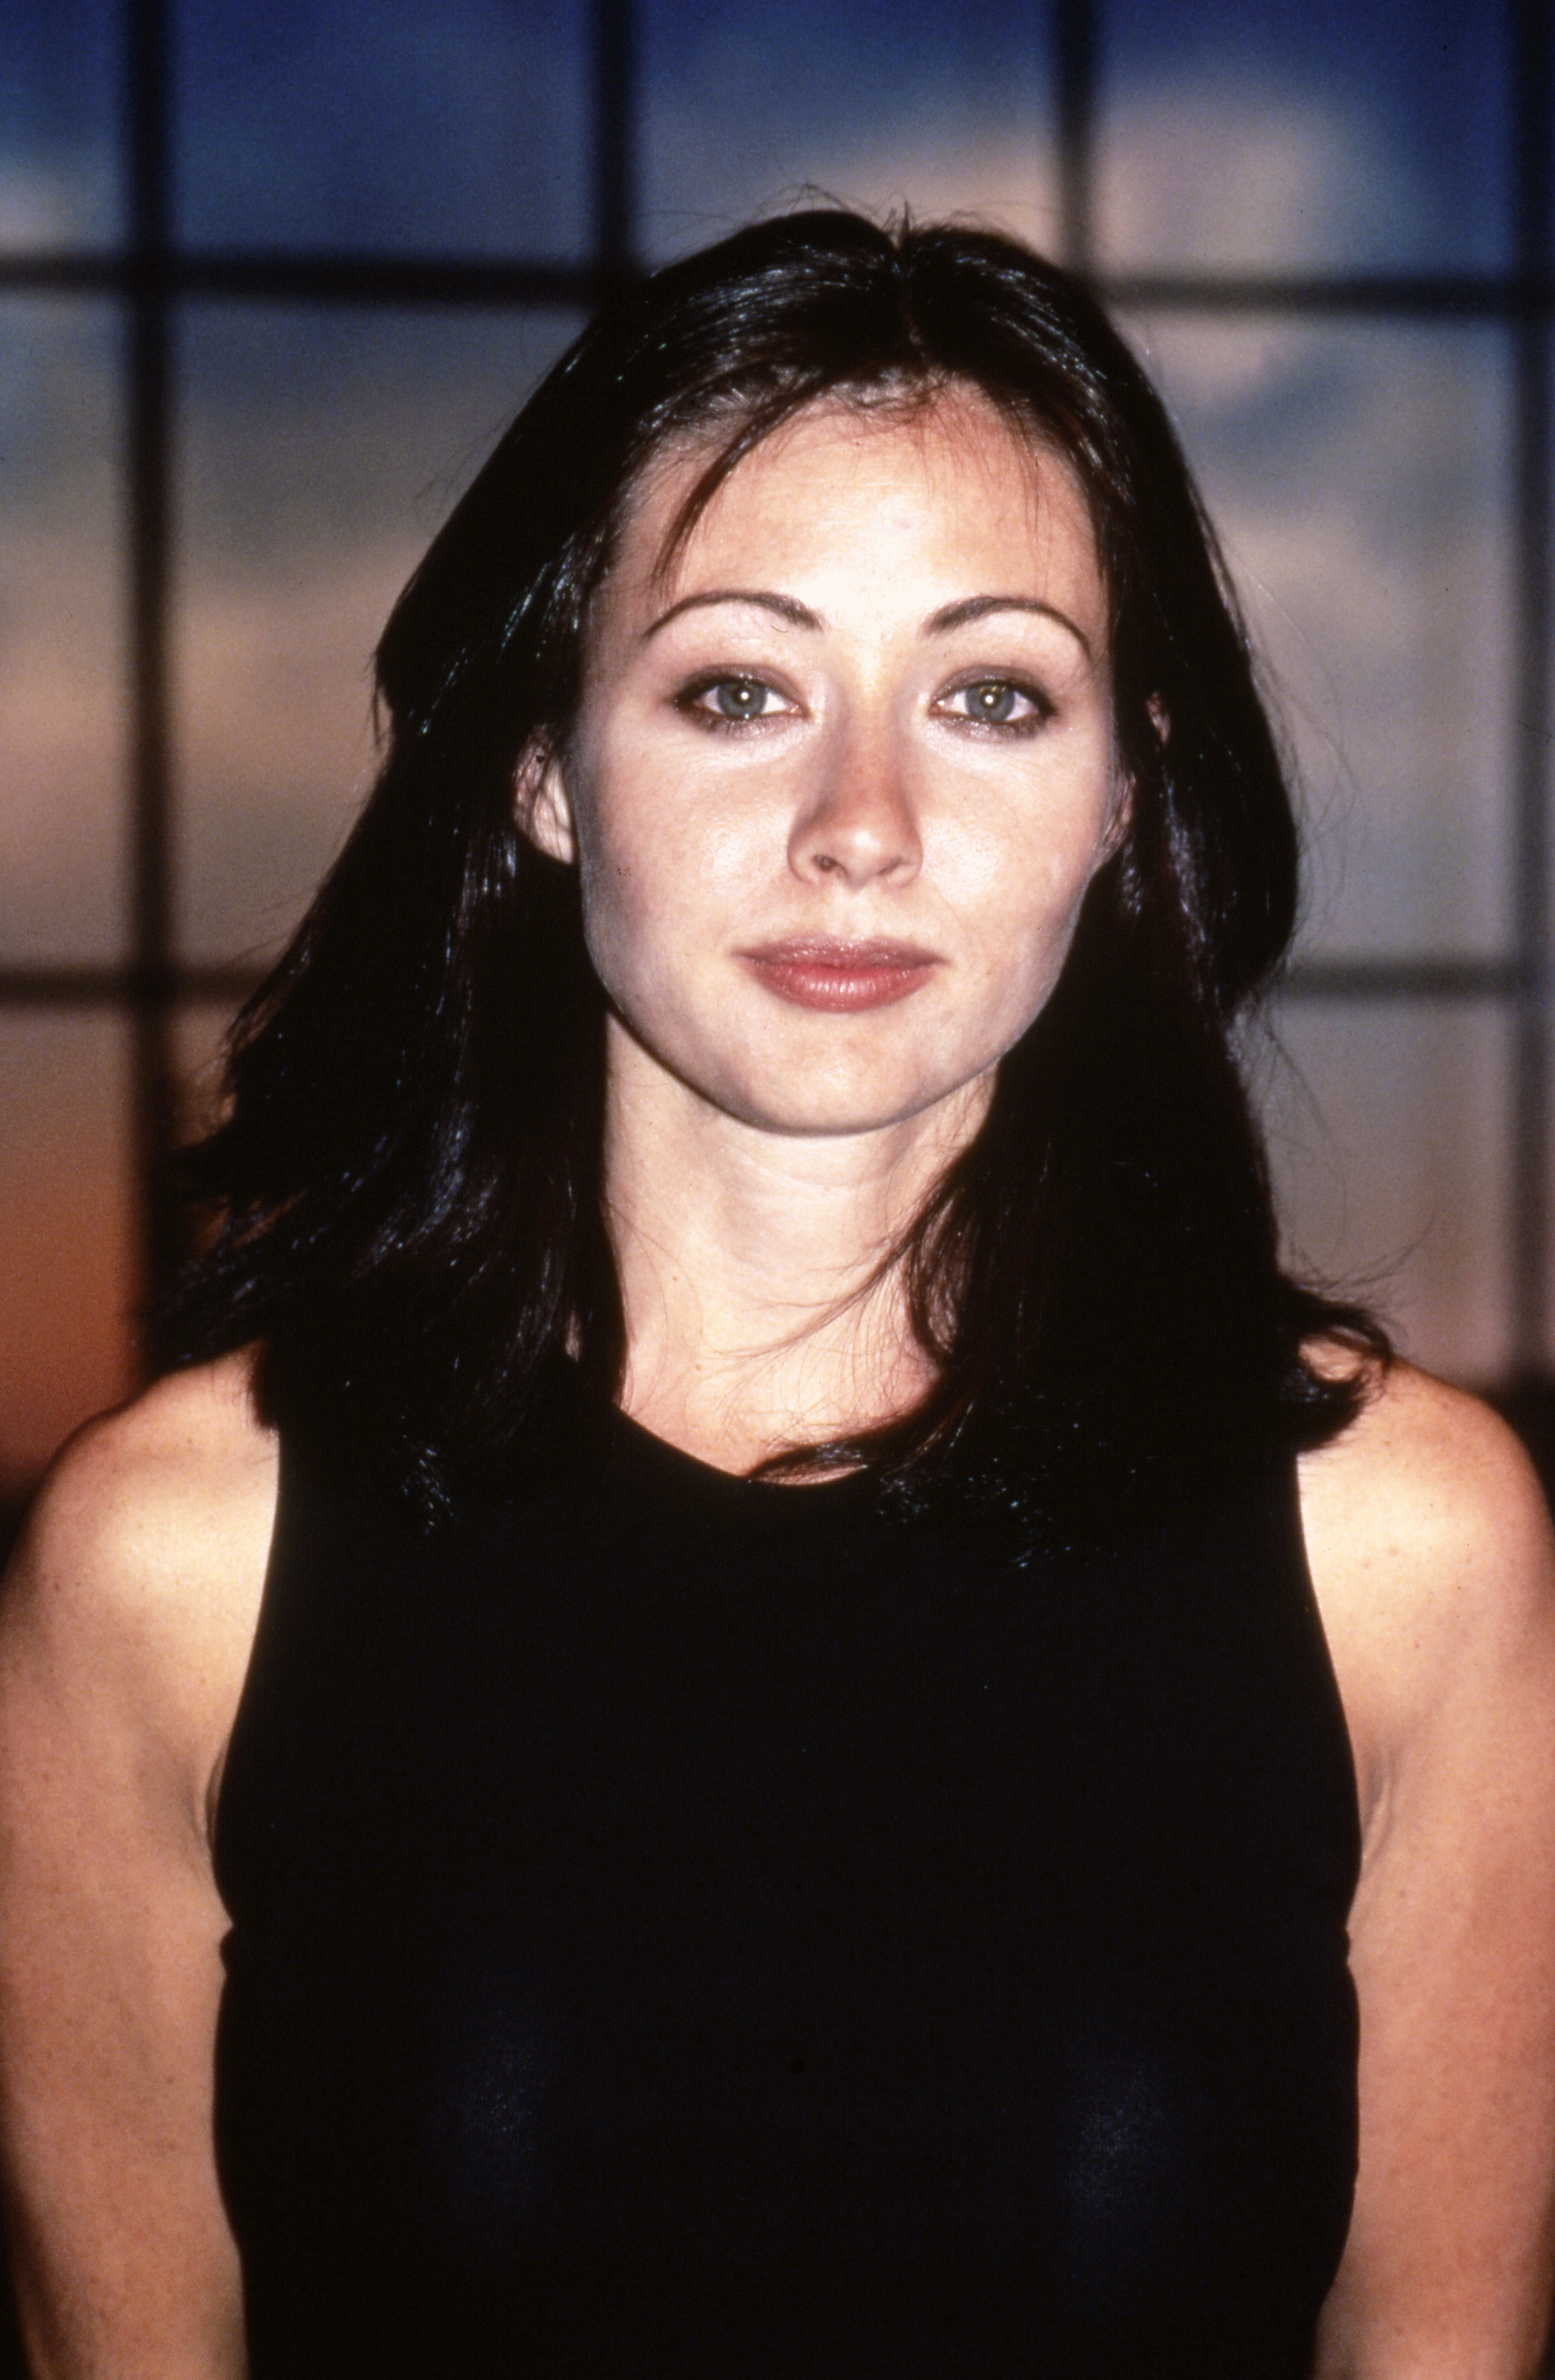 Shannon doherty hot